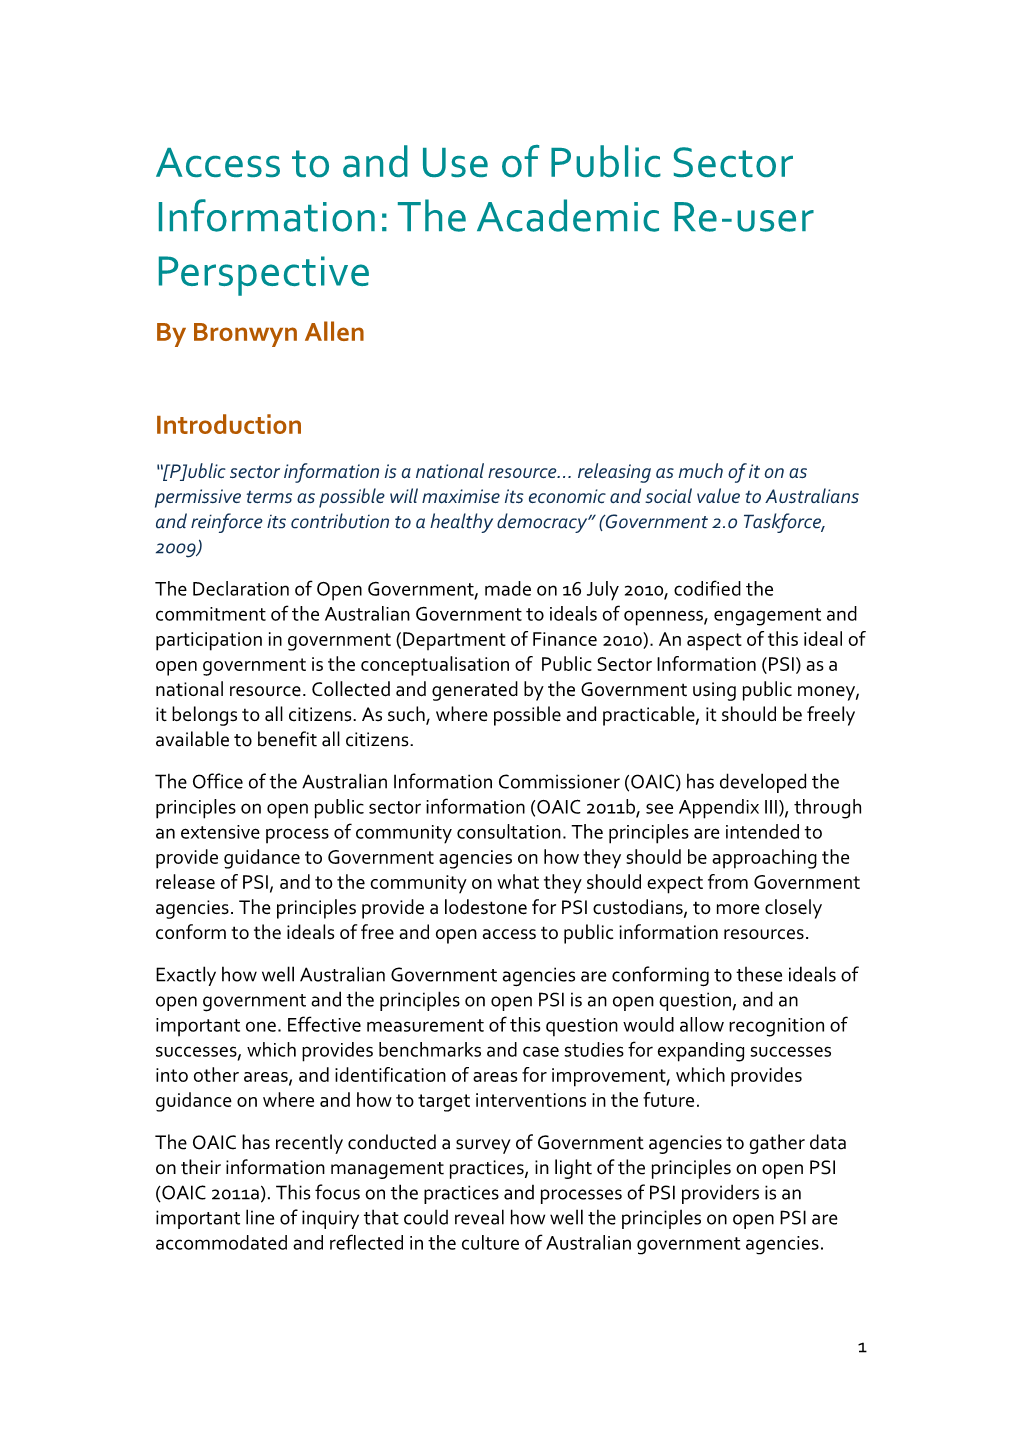 Access to and Use of Public Sector Information: the Academic Re-User Perspective